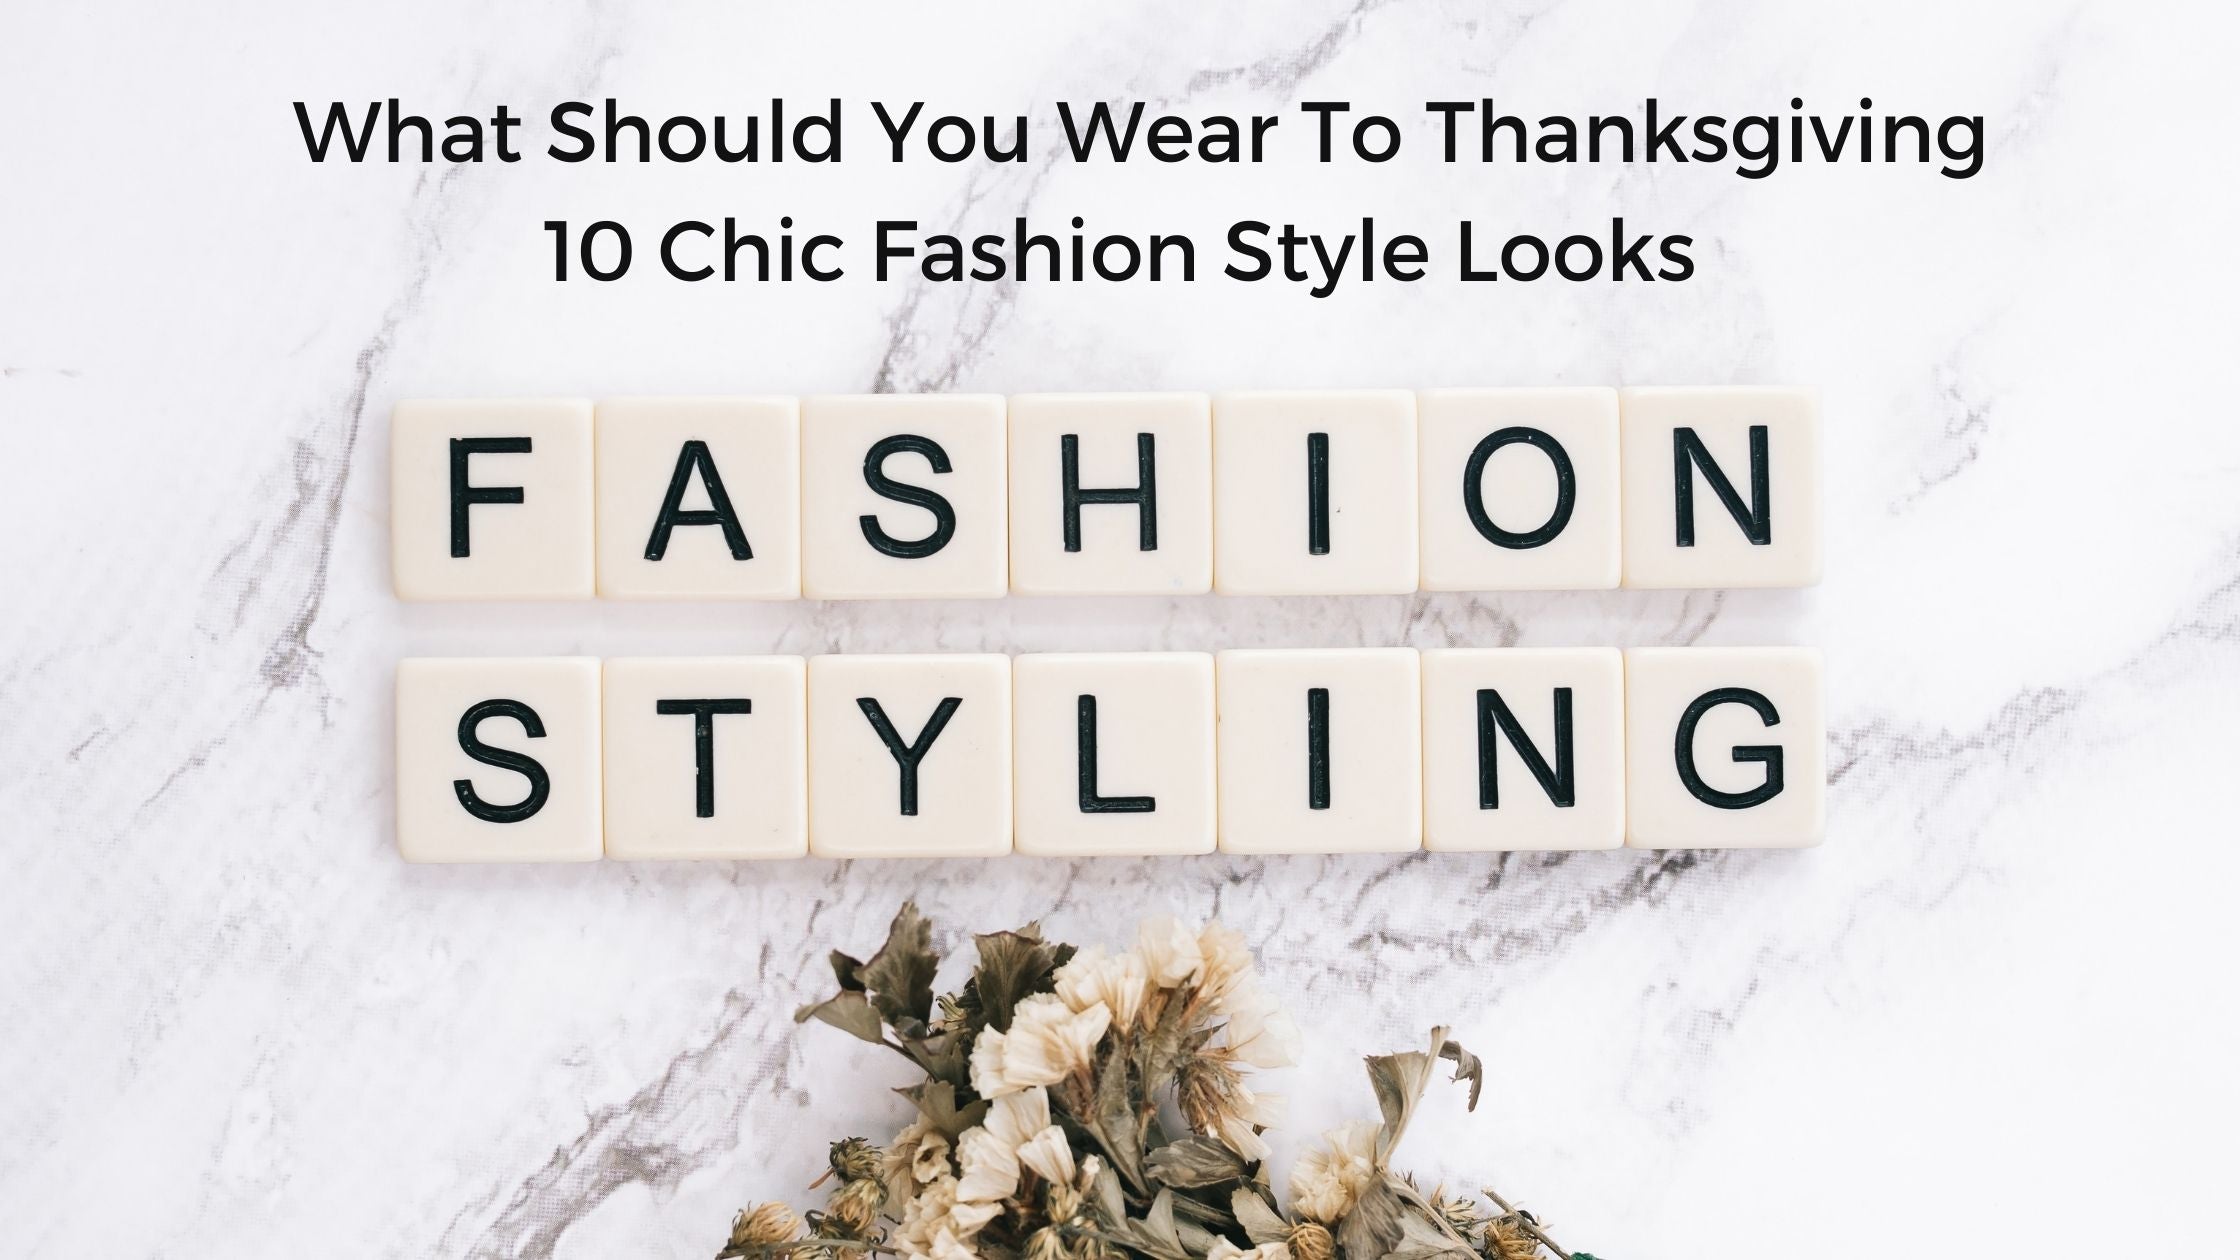 What Should You Wear To Thanksgiving: 10 Chic Fashion Style Looks